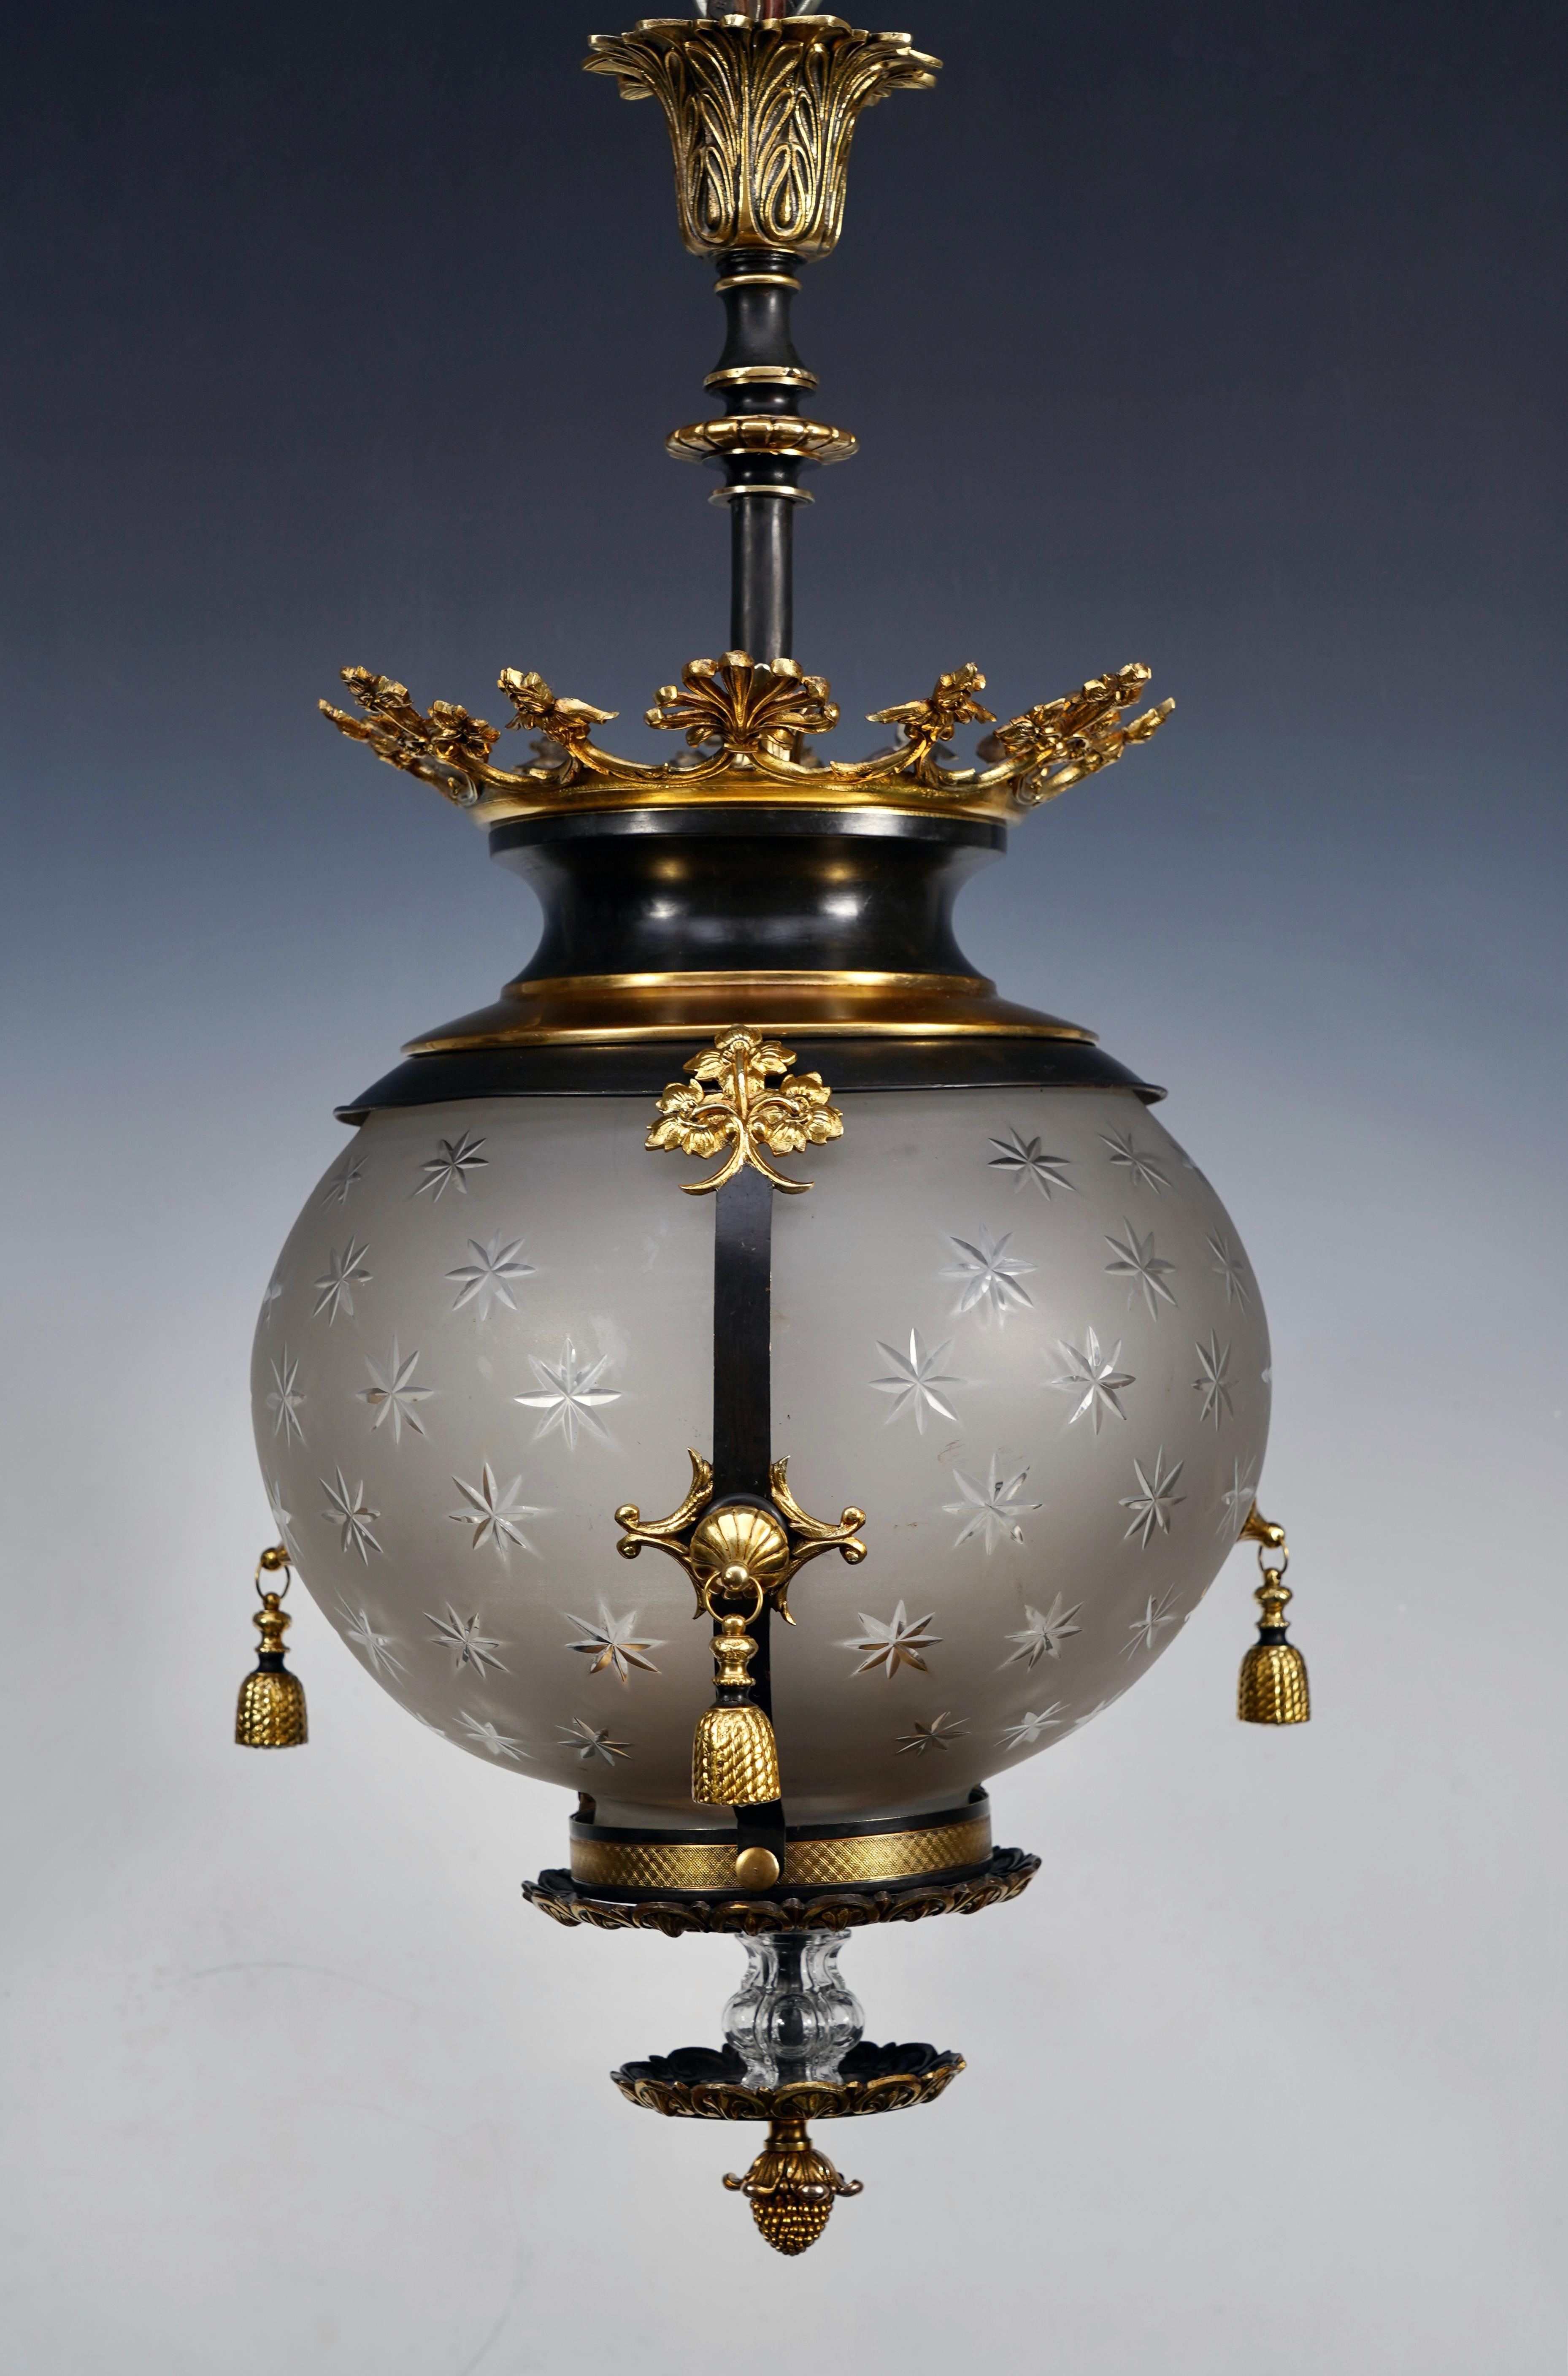 Elegant Napoleon III period lantern in patinated bronze with gold highlights and crystal. The central shaft, in the shape of a globe engraved with stars, is surrounded by three bands decorated with a central pompom, and topped with a leafy crown.